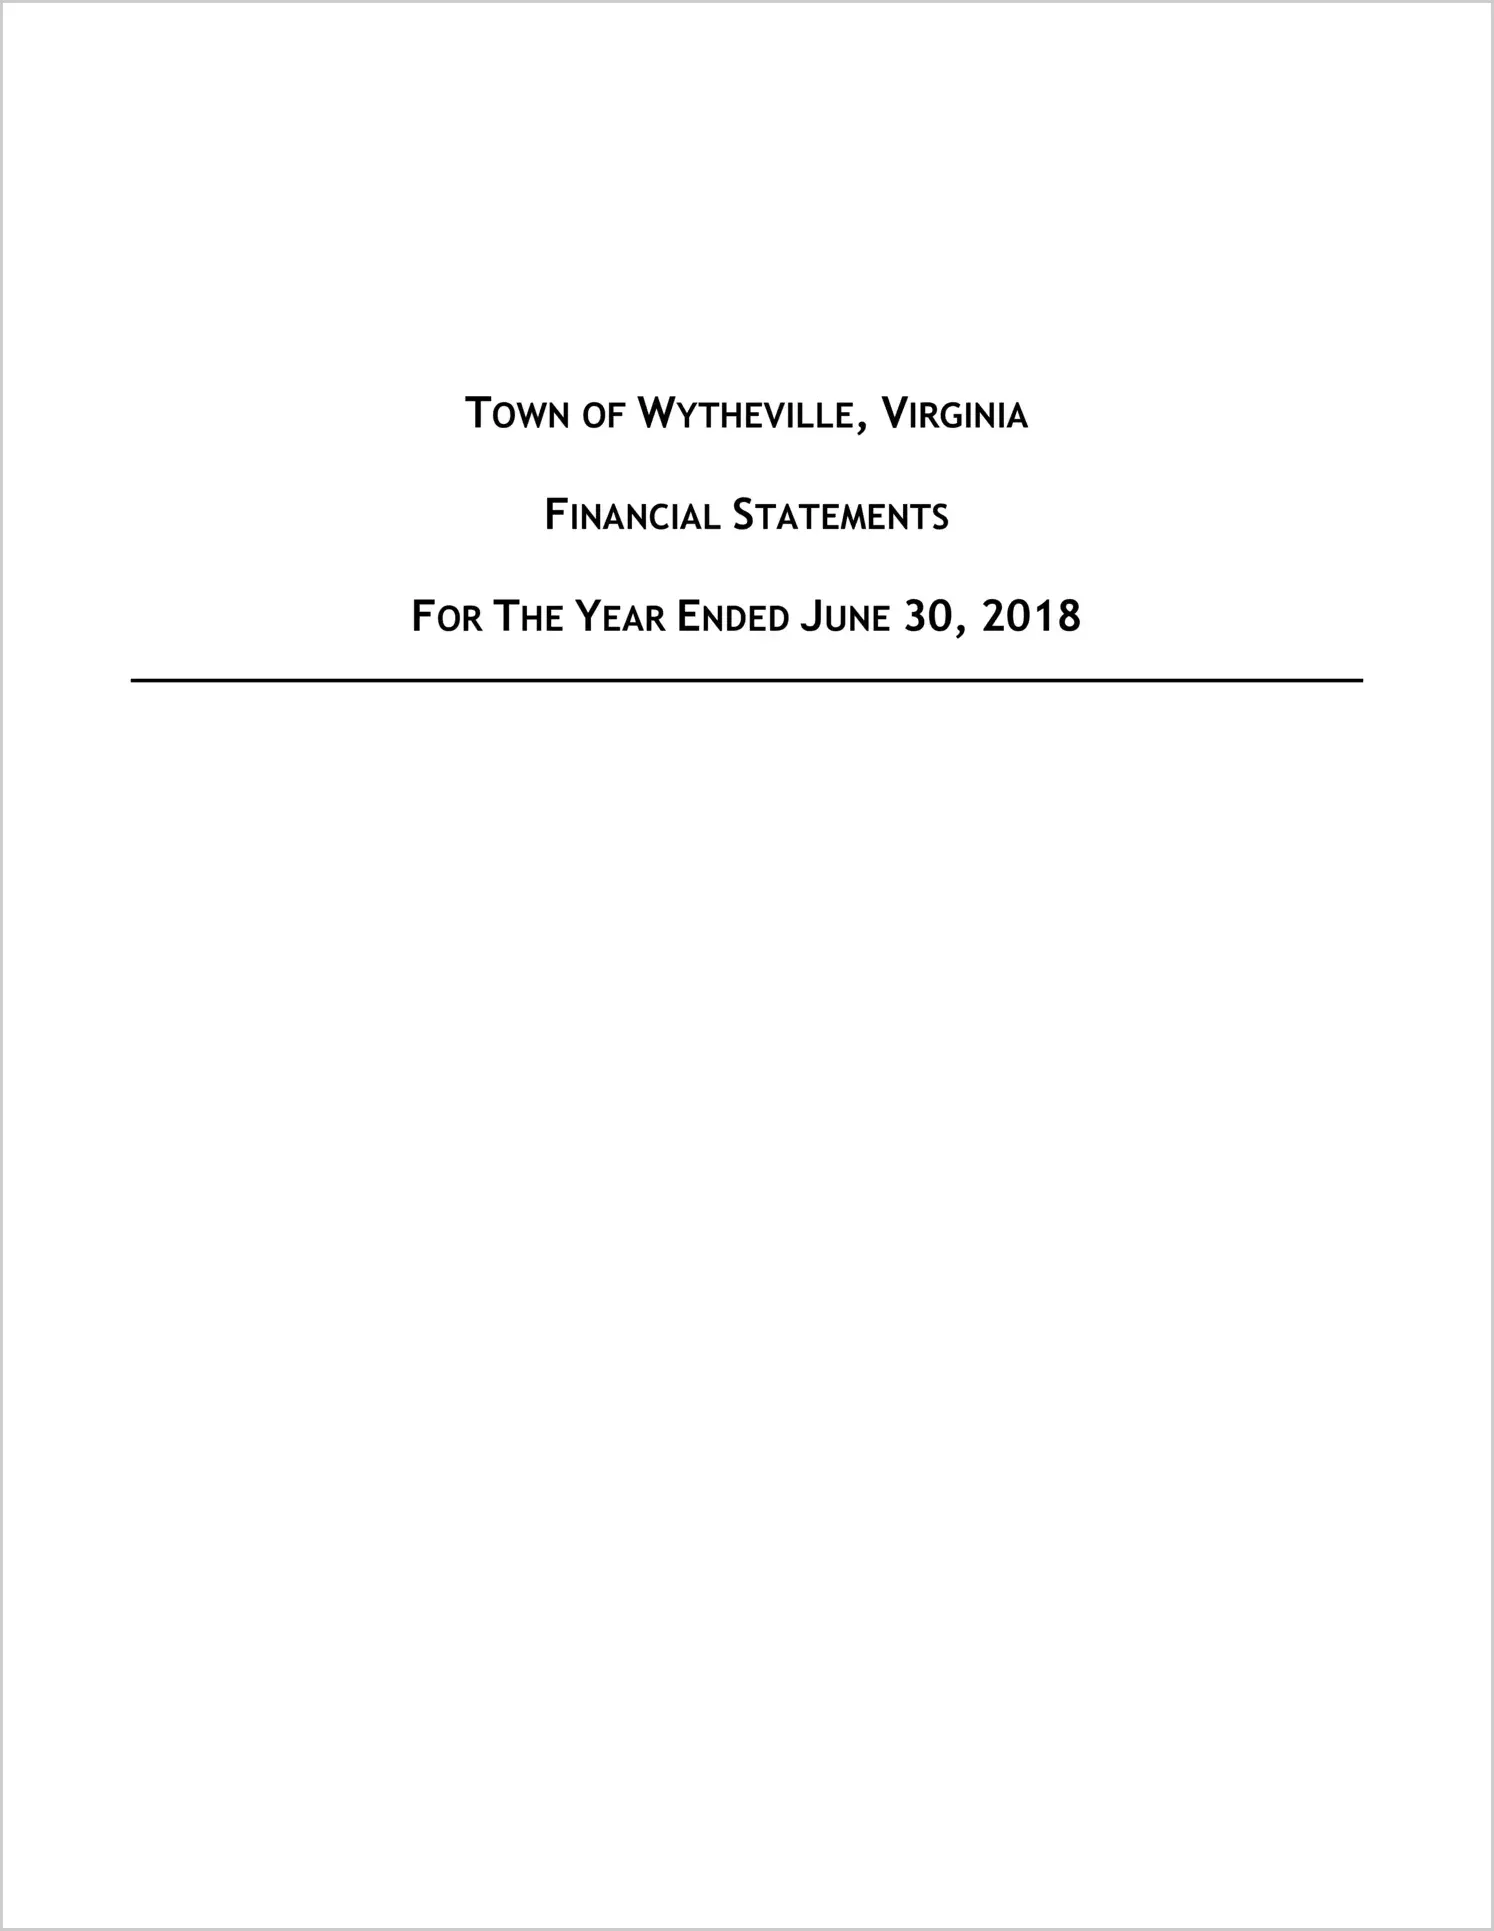 2018 Annual Financial Report for Town of Wytheville